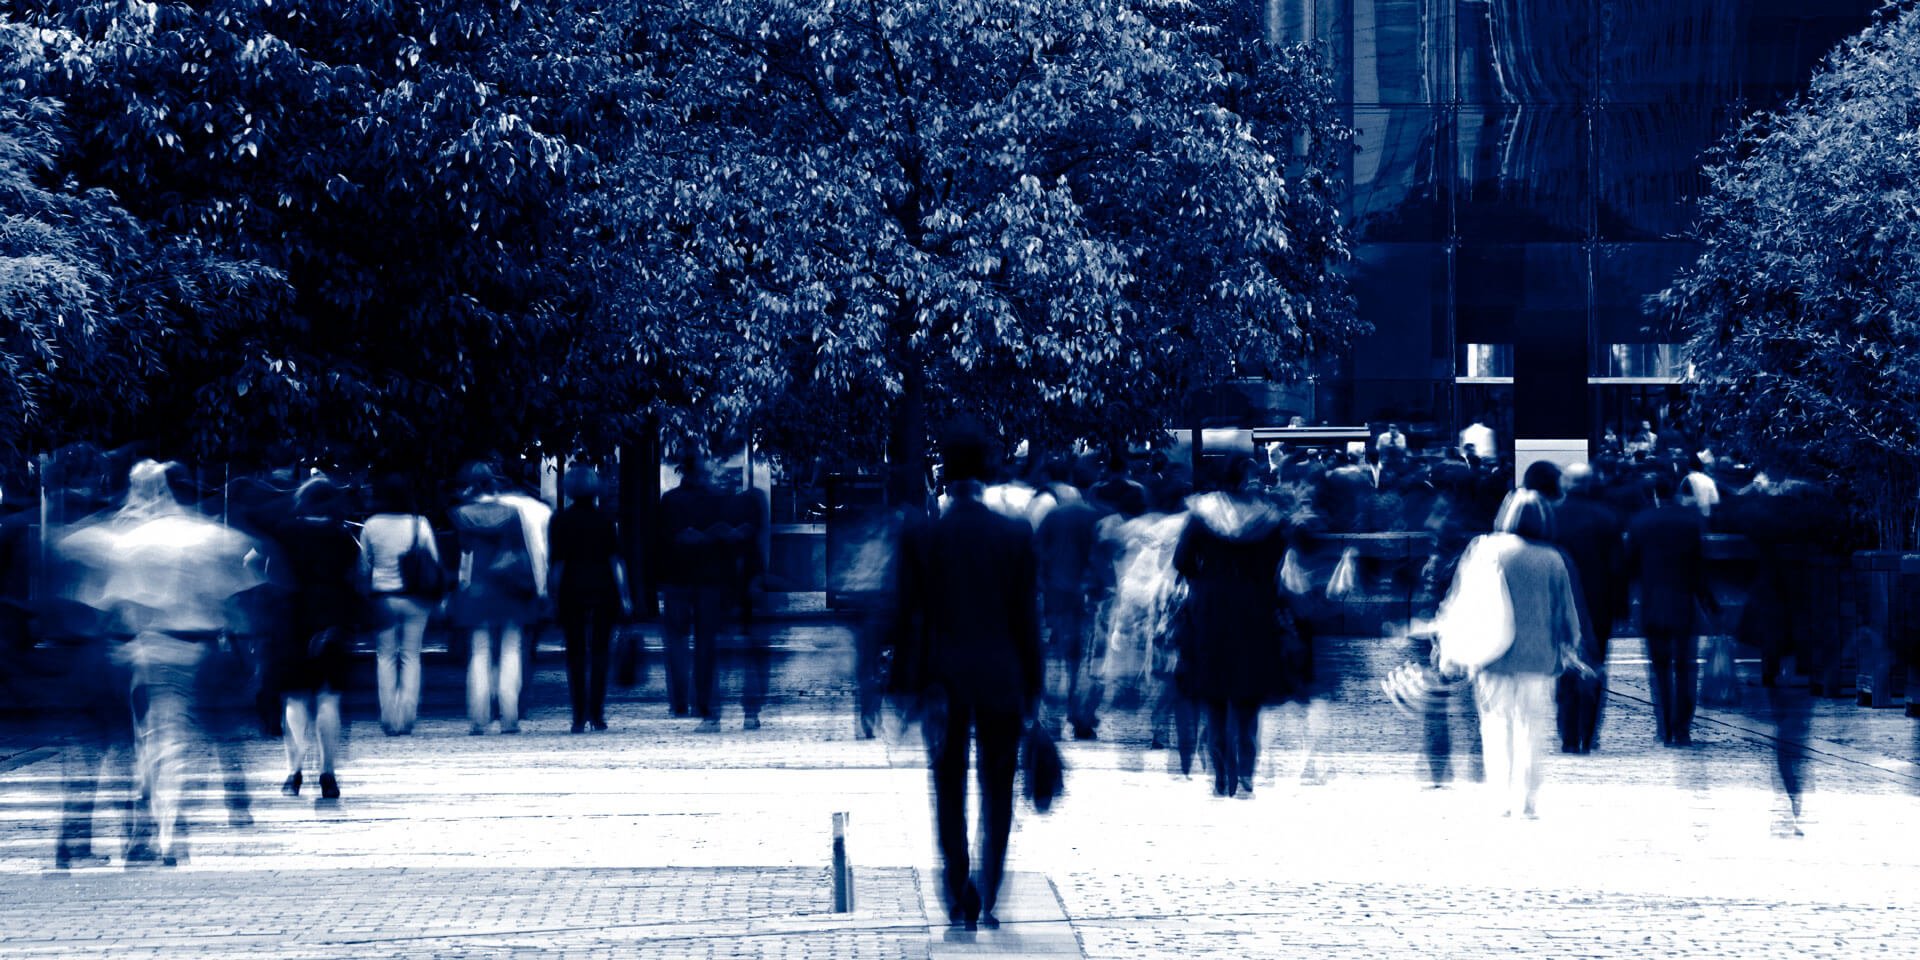 Blurred black and white images a professionally dressed people walking down a sidewalk.